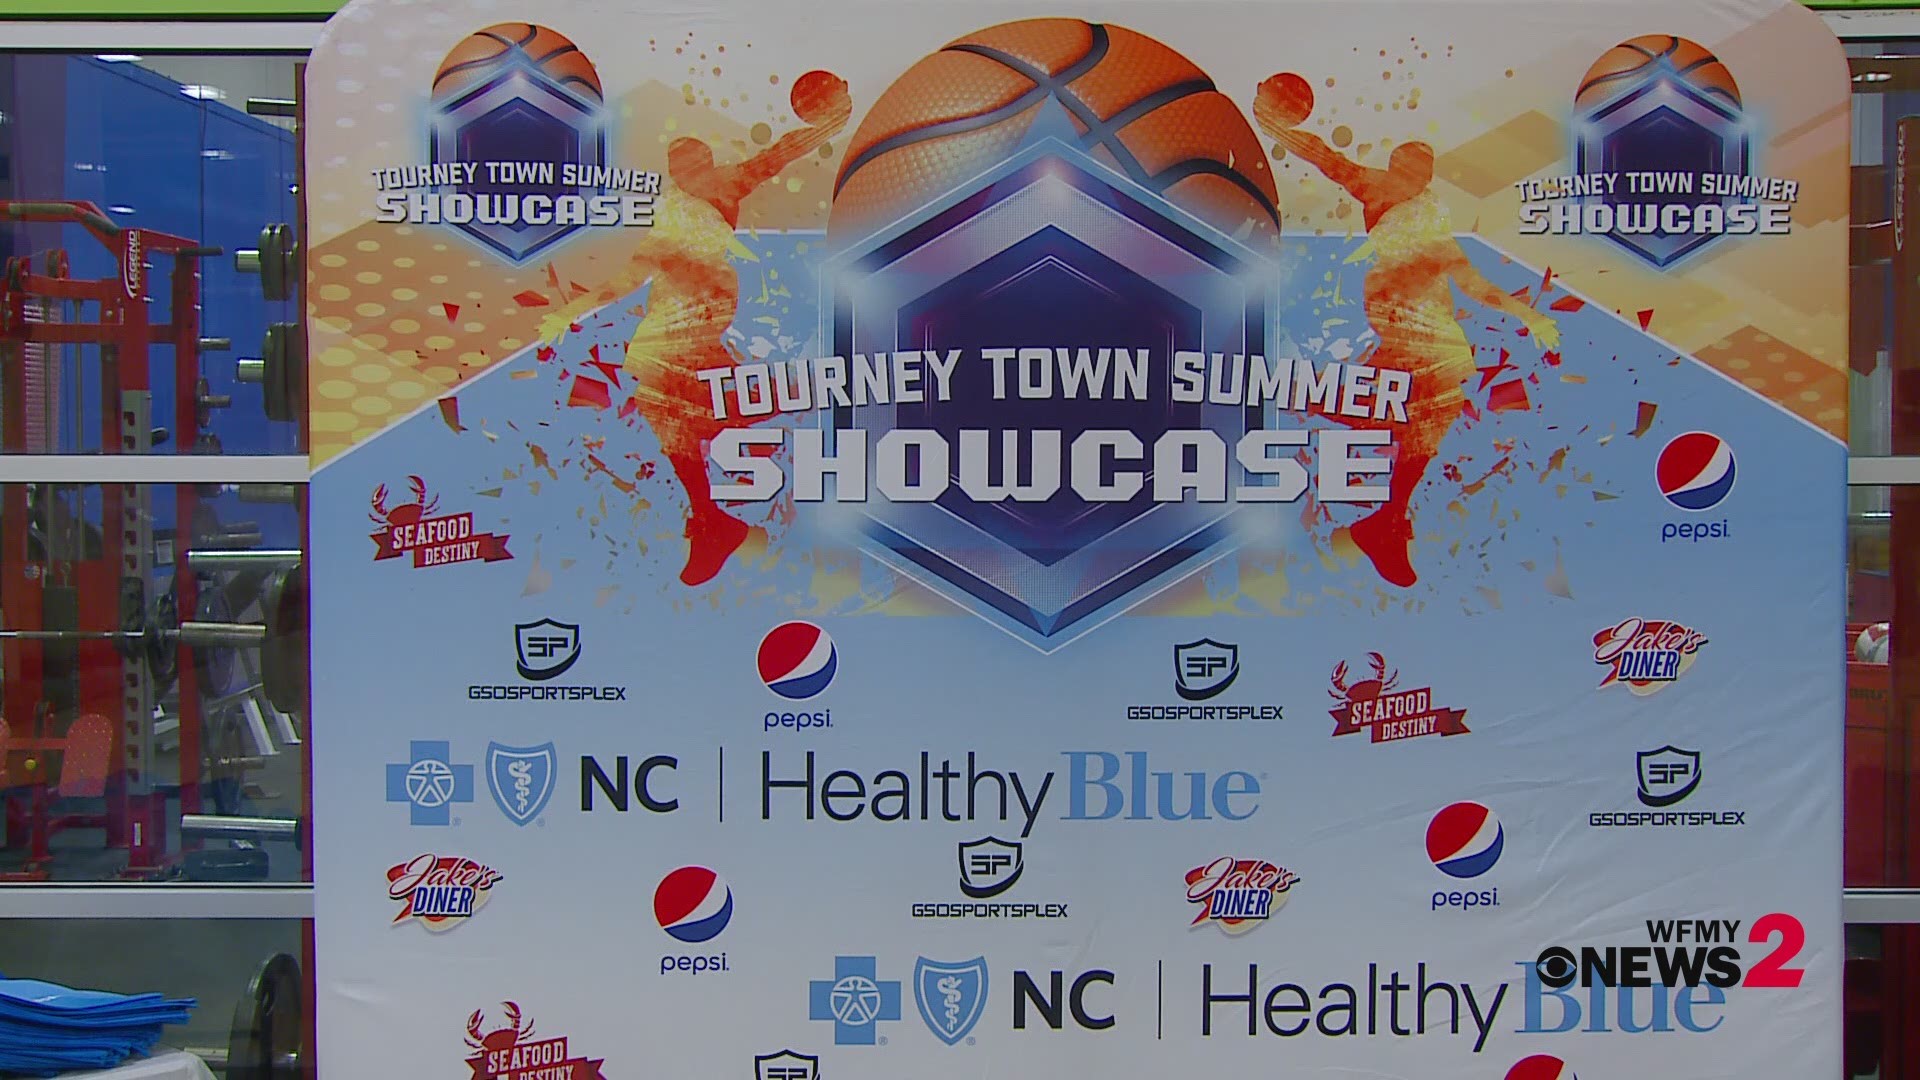 22 teams are competing in the 2021 Tourney Town Showcase in the month of June.